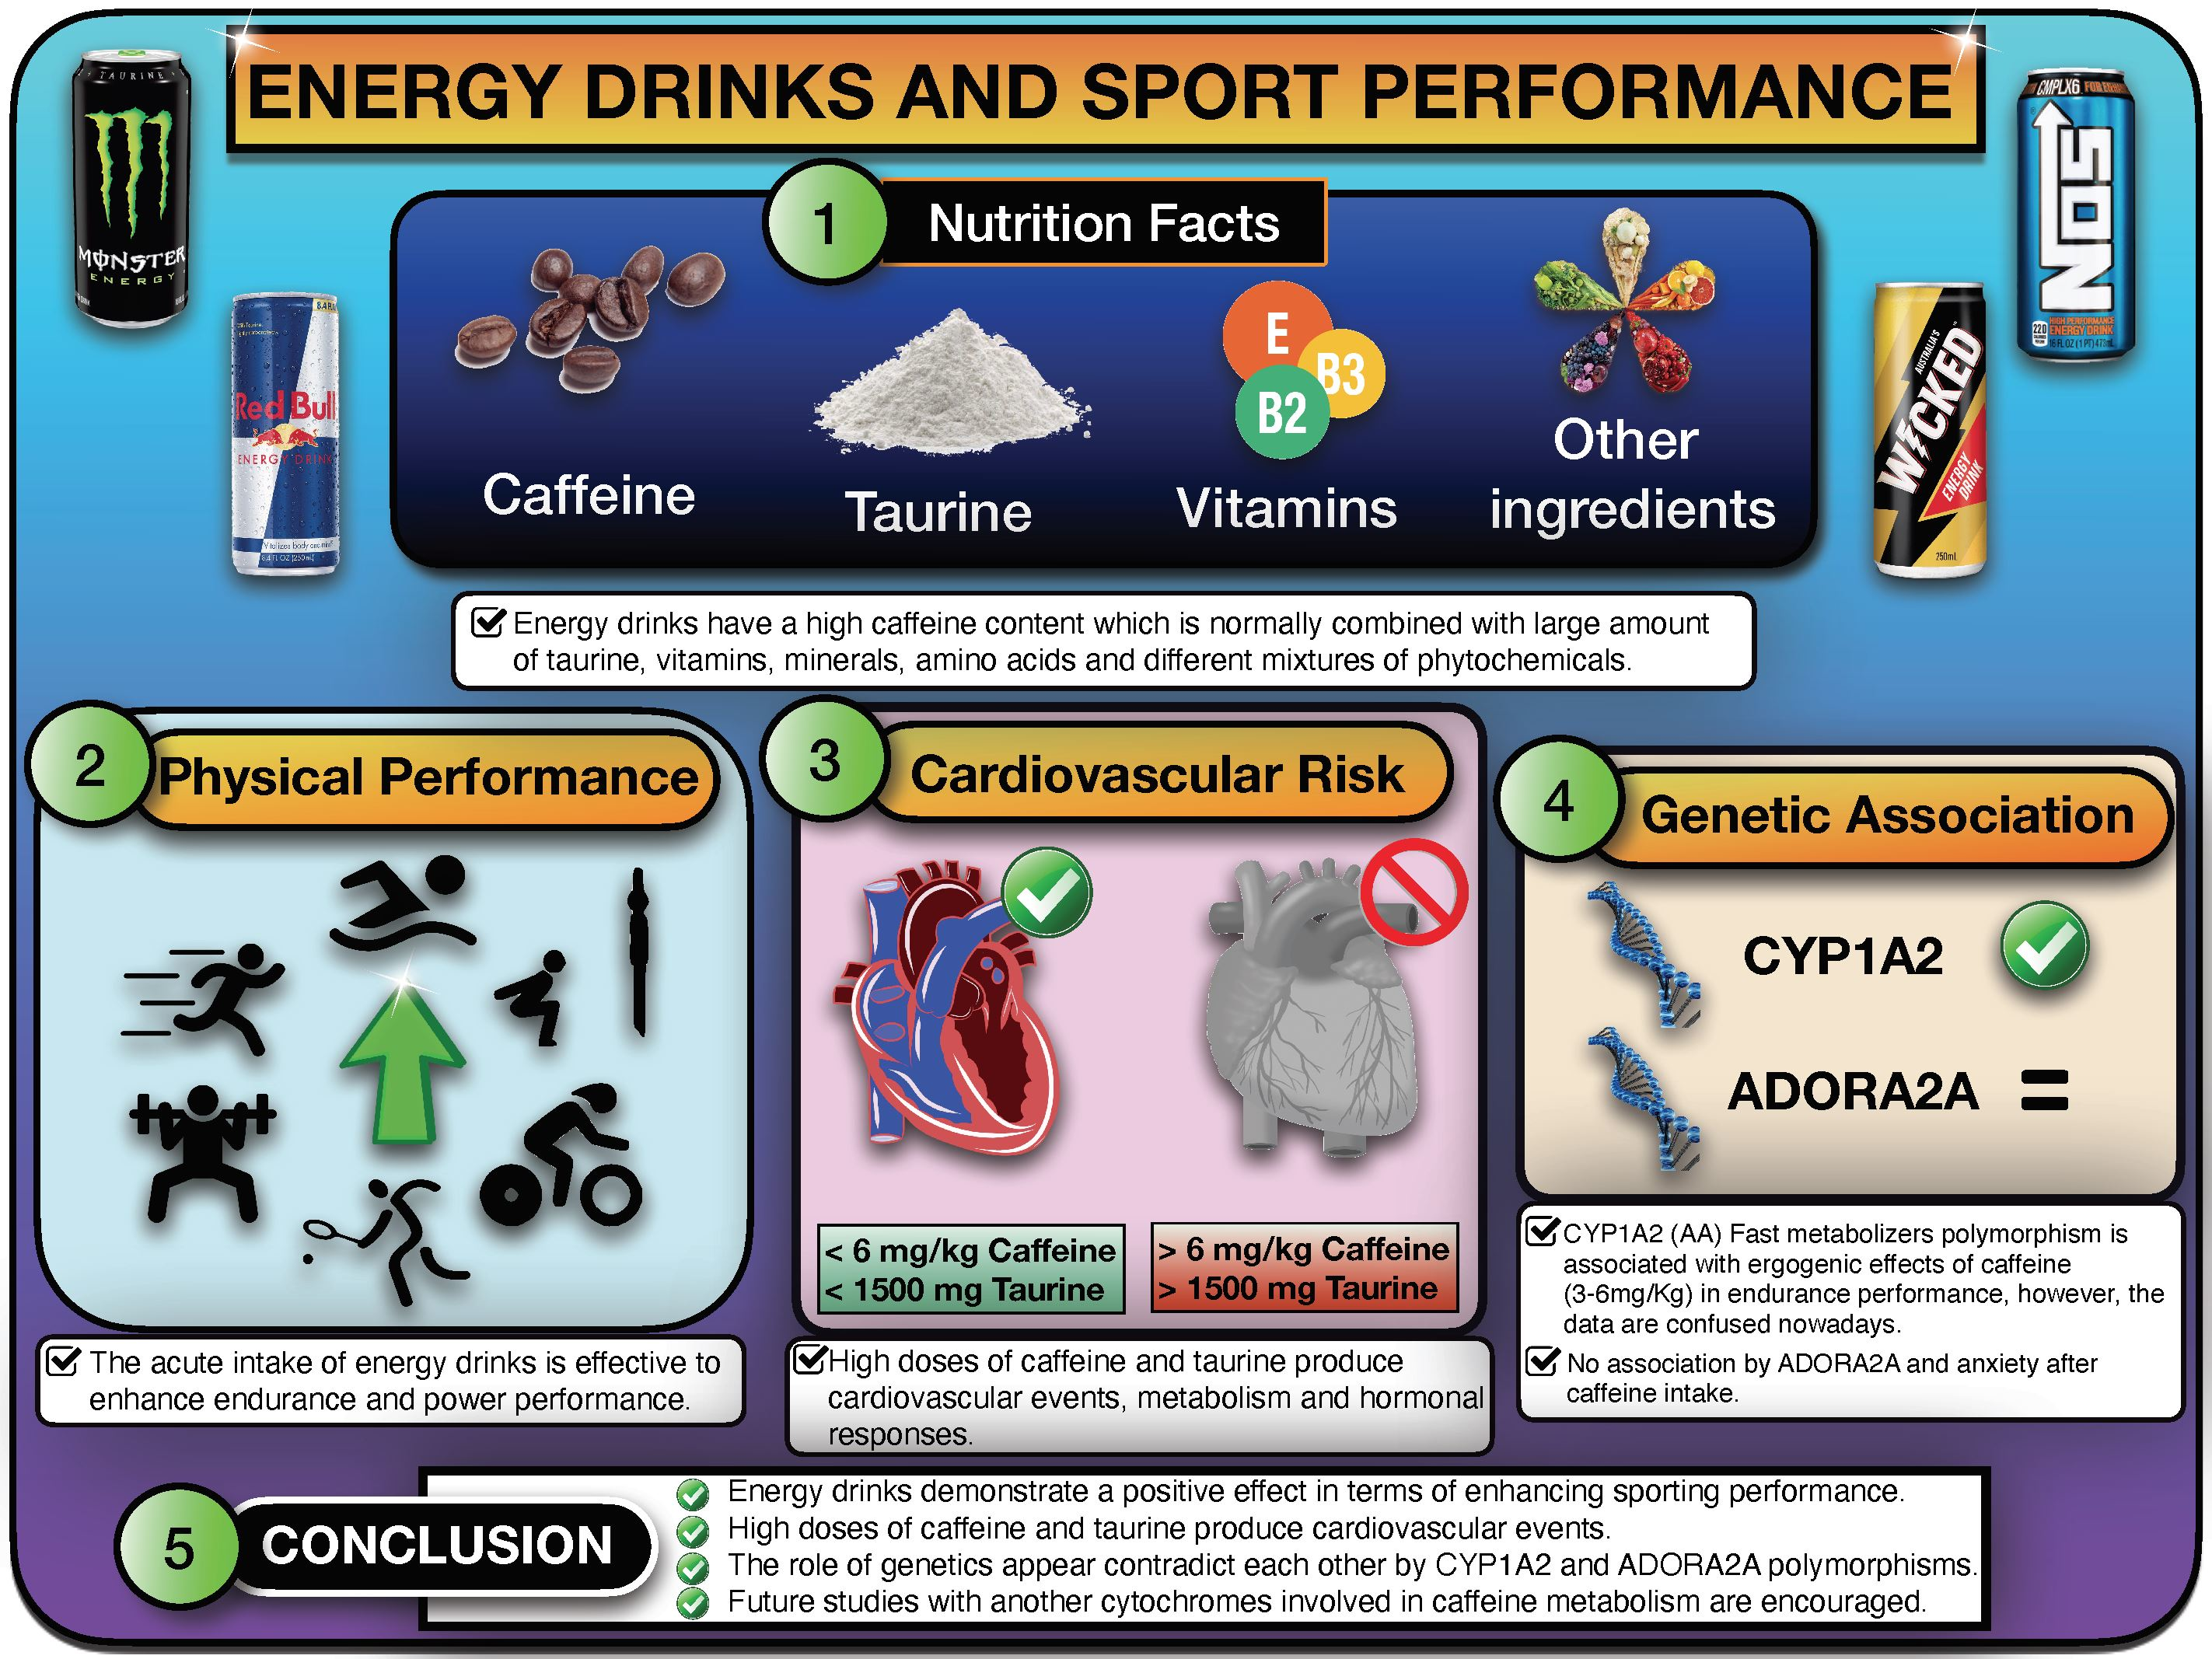 Nutrients Free Full-Text Energy Drinks and Sports Performance, Cardiovascular Risk, and Genetic Associations; Future Prospects photo